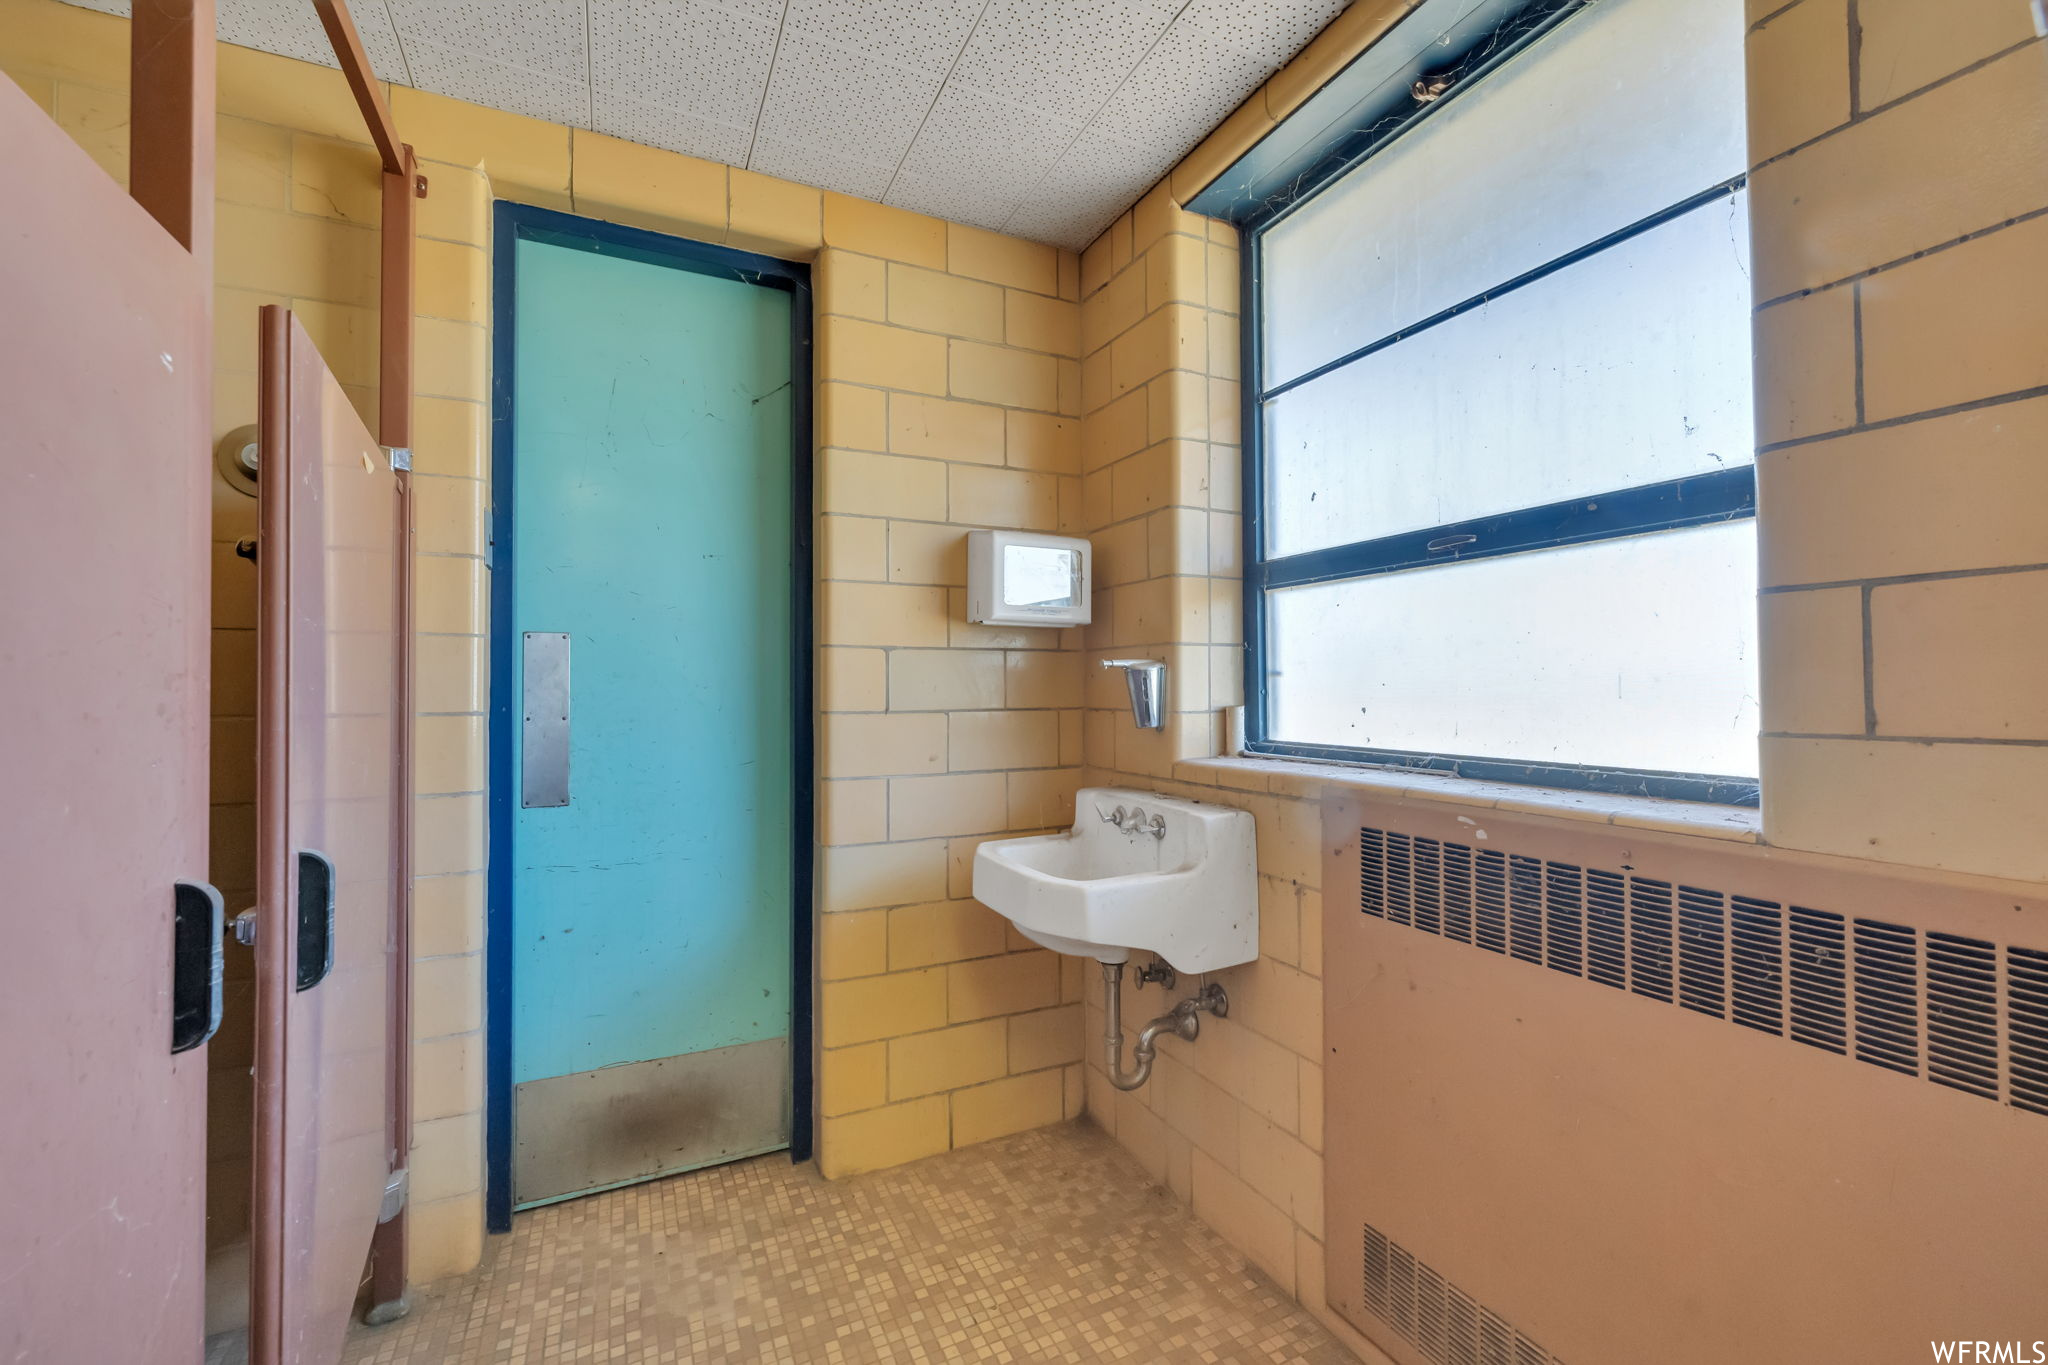 Bathroom with sink and radiator heating unit, located in the annex